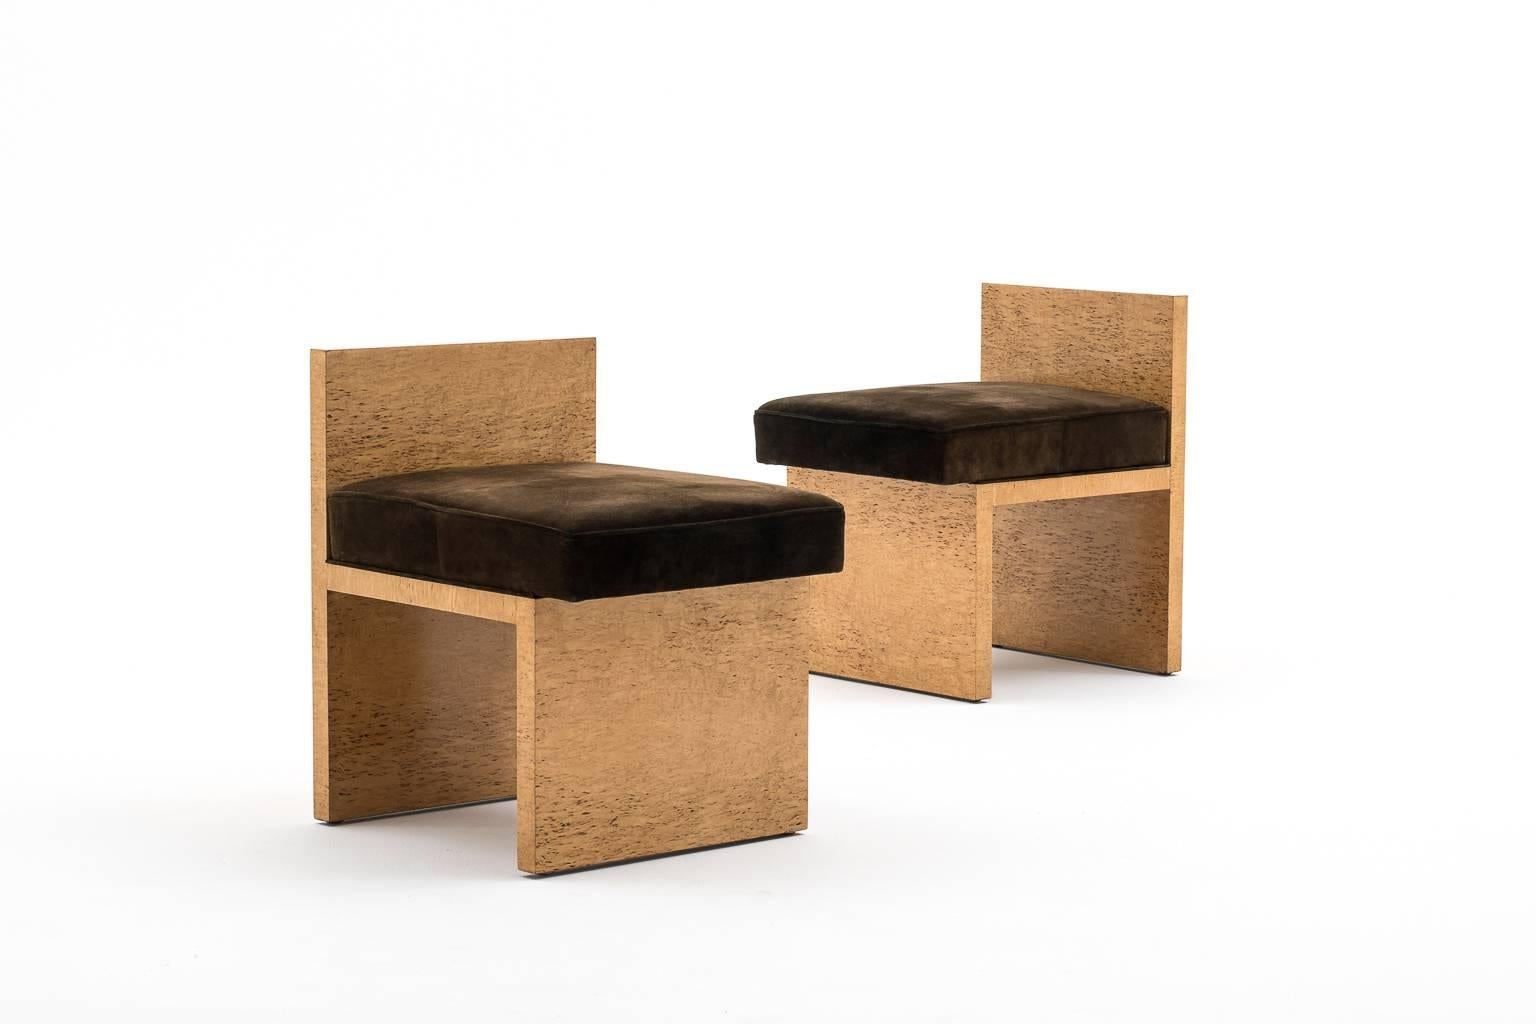 Exceptional and unique pair of French Modernist ‘Chauffeuses’, 1950s. Made from birch veneer, cushions are covered with the original dark brown suede which shows a beautiful patina.